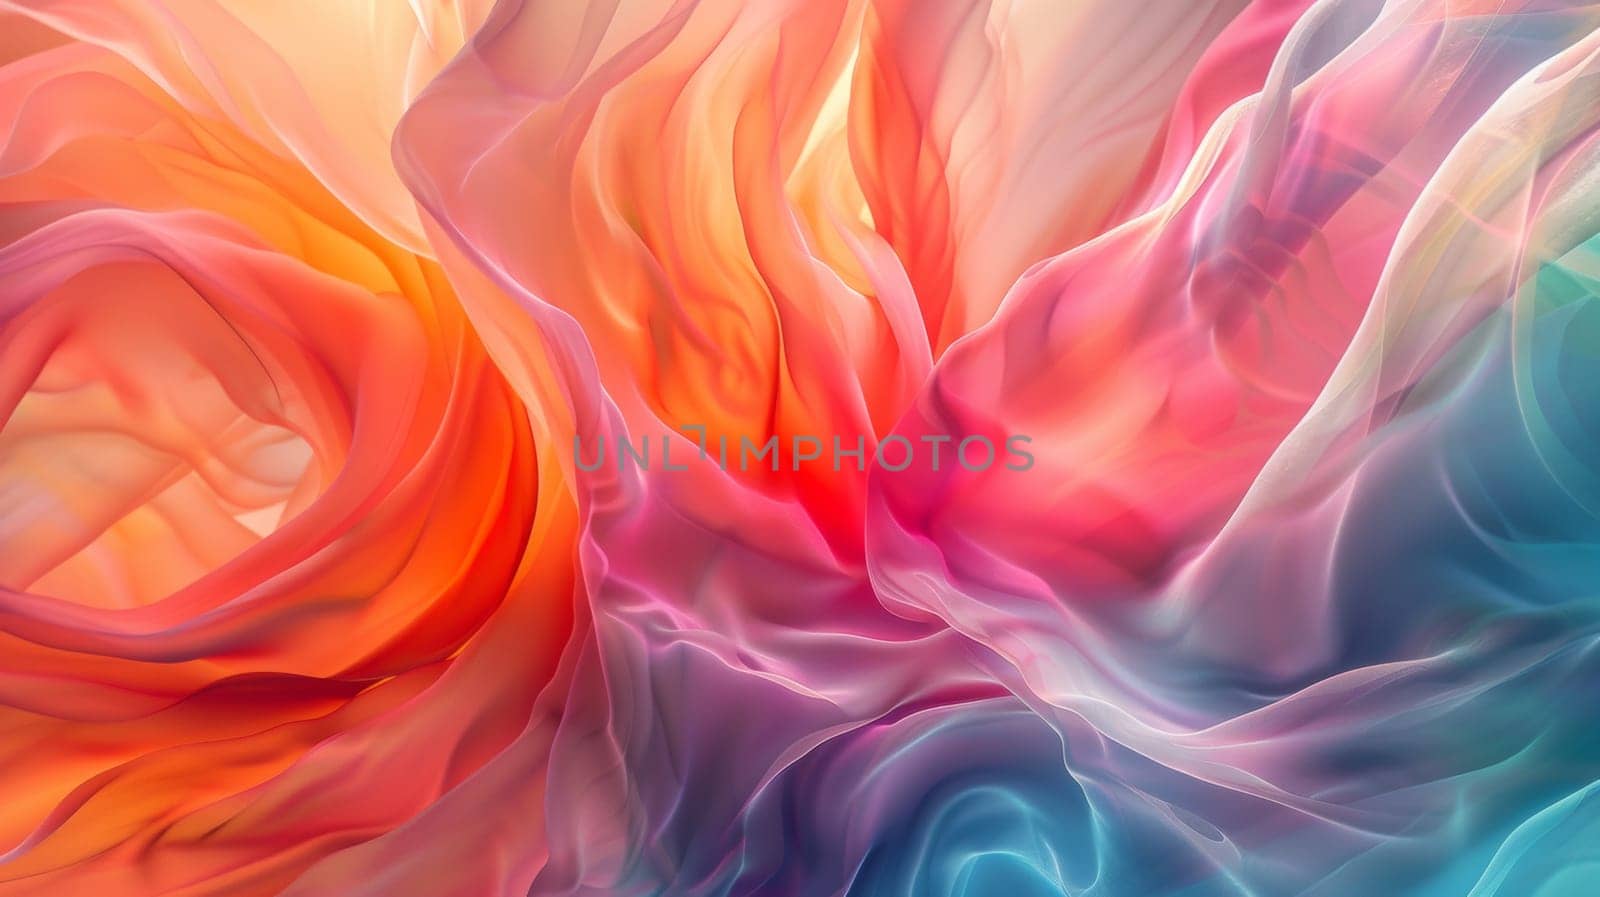 A close up of a colorful abstract painting with swirls and waves